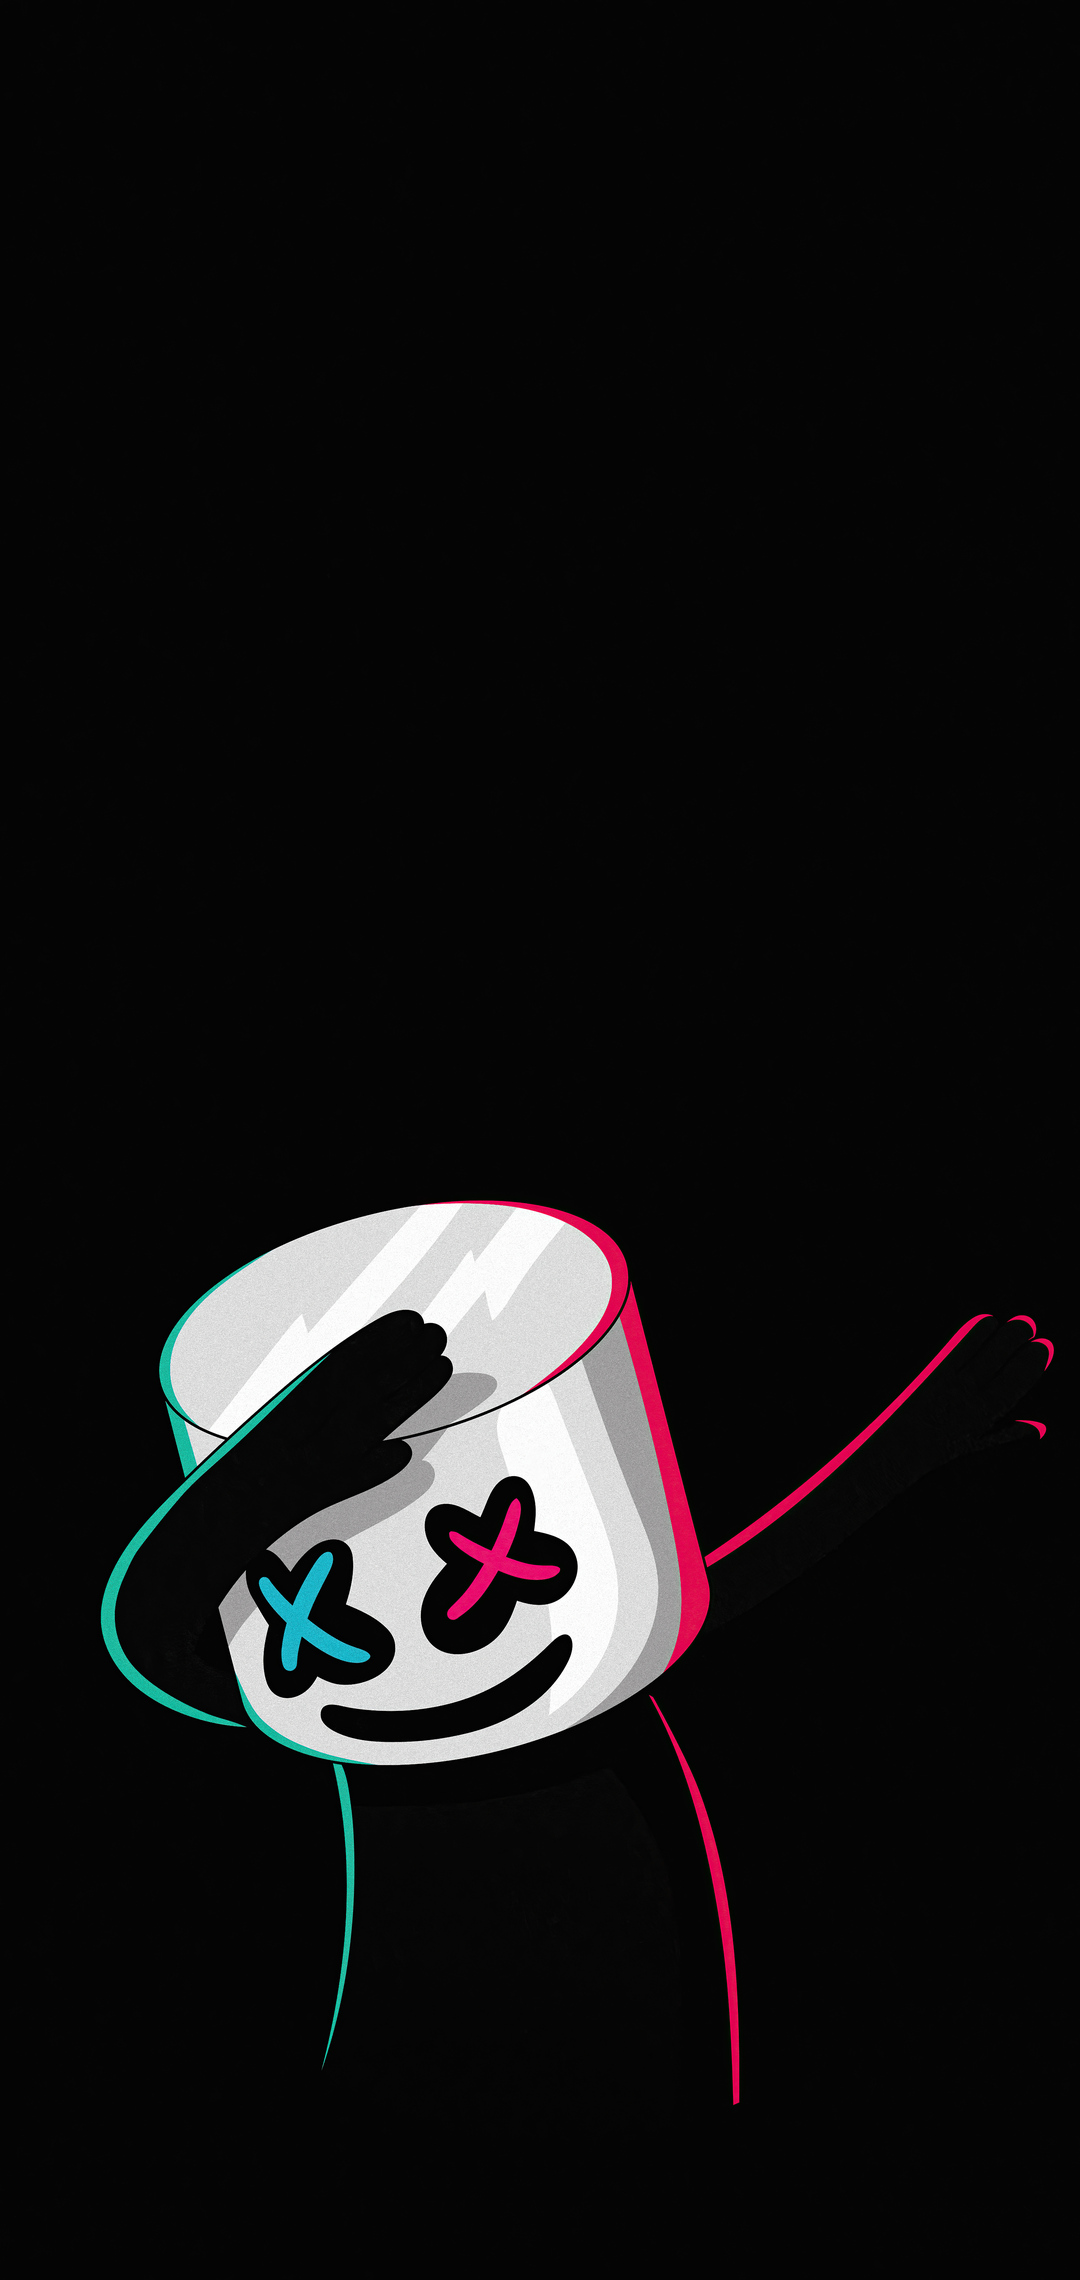 1080x2280 Marshmello Dark 5k One Plus 6,Huawei p20,Honor view 10,Vivo  y85,Oppo f7,Xiaomi Mi A2 HD 4k Wallpapers, Images, Backgrounds, Photos and  Pictures